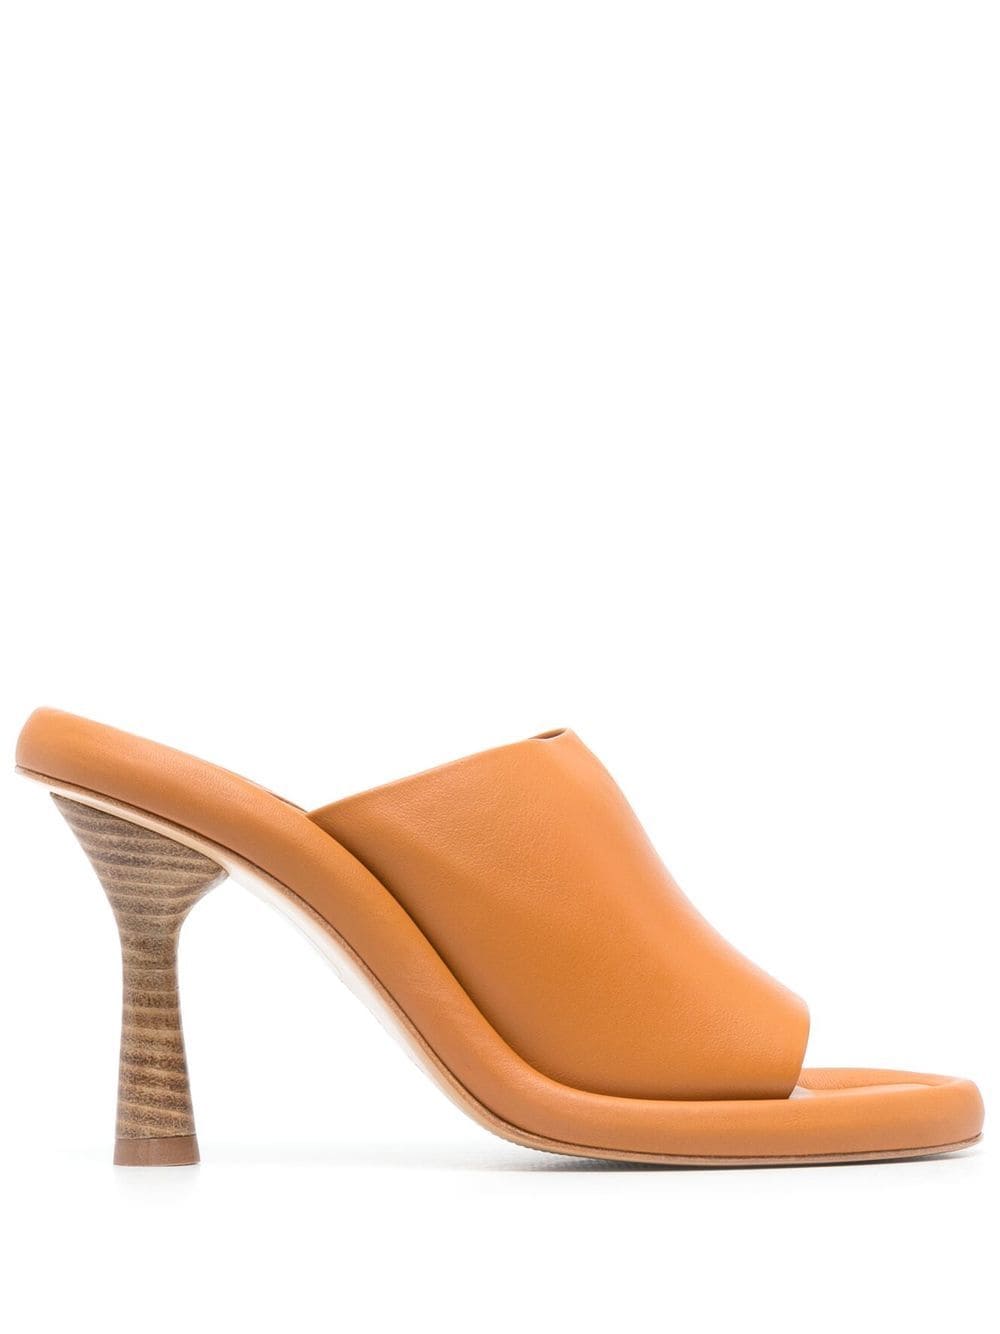 PALOMA BARCELÓ OPEN-TOE 105MM LEATHER MULES